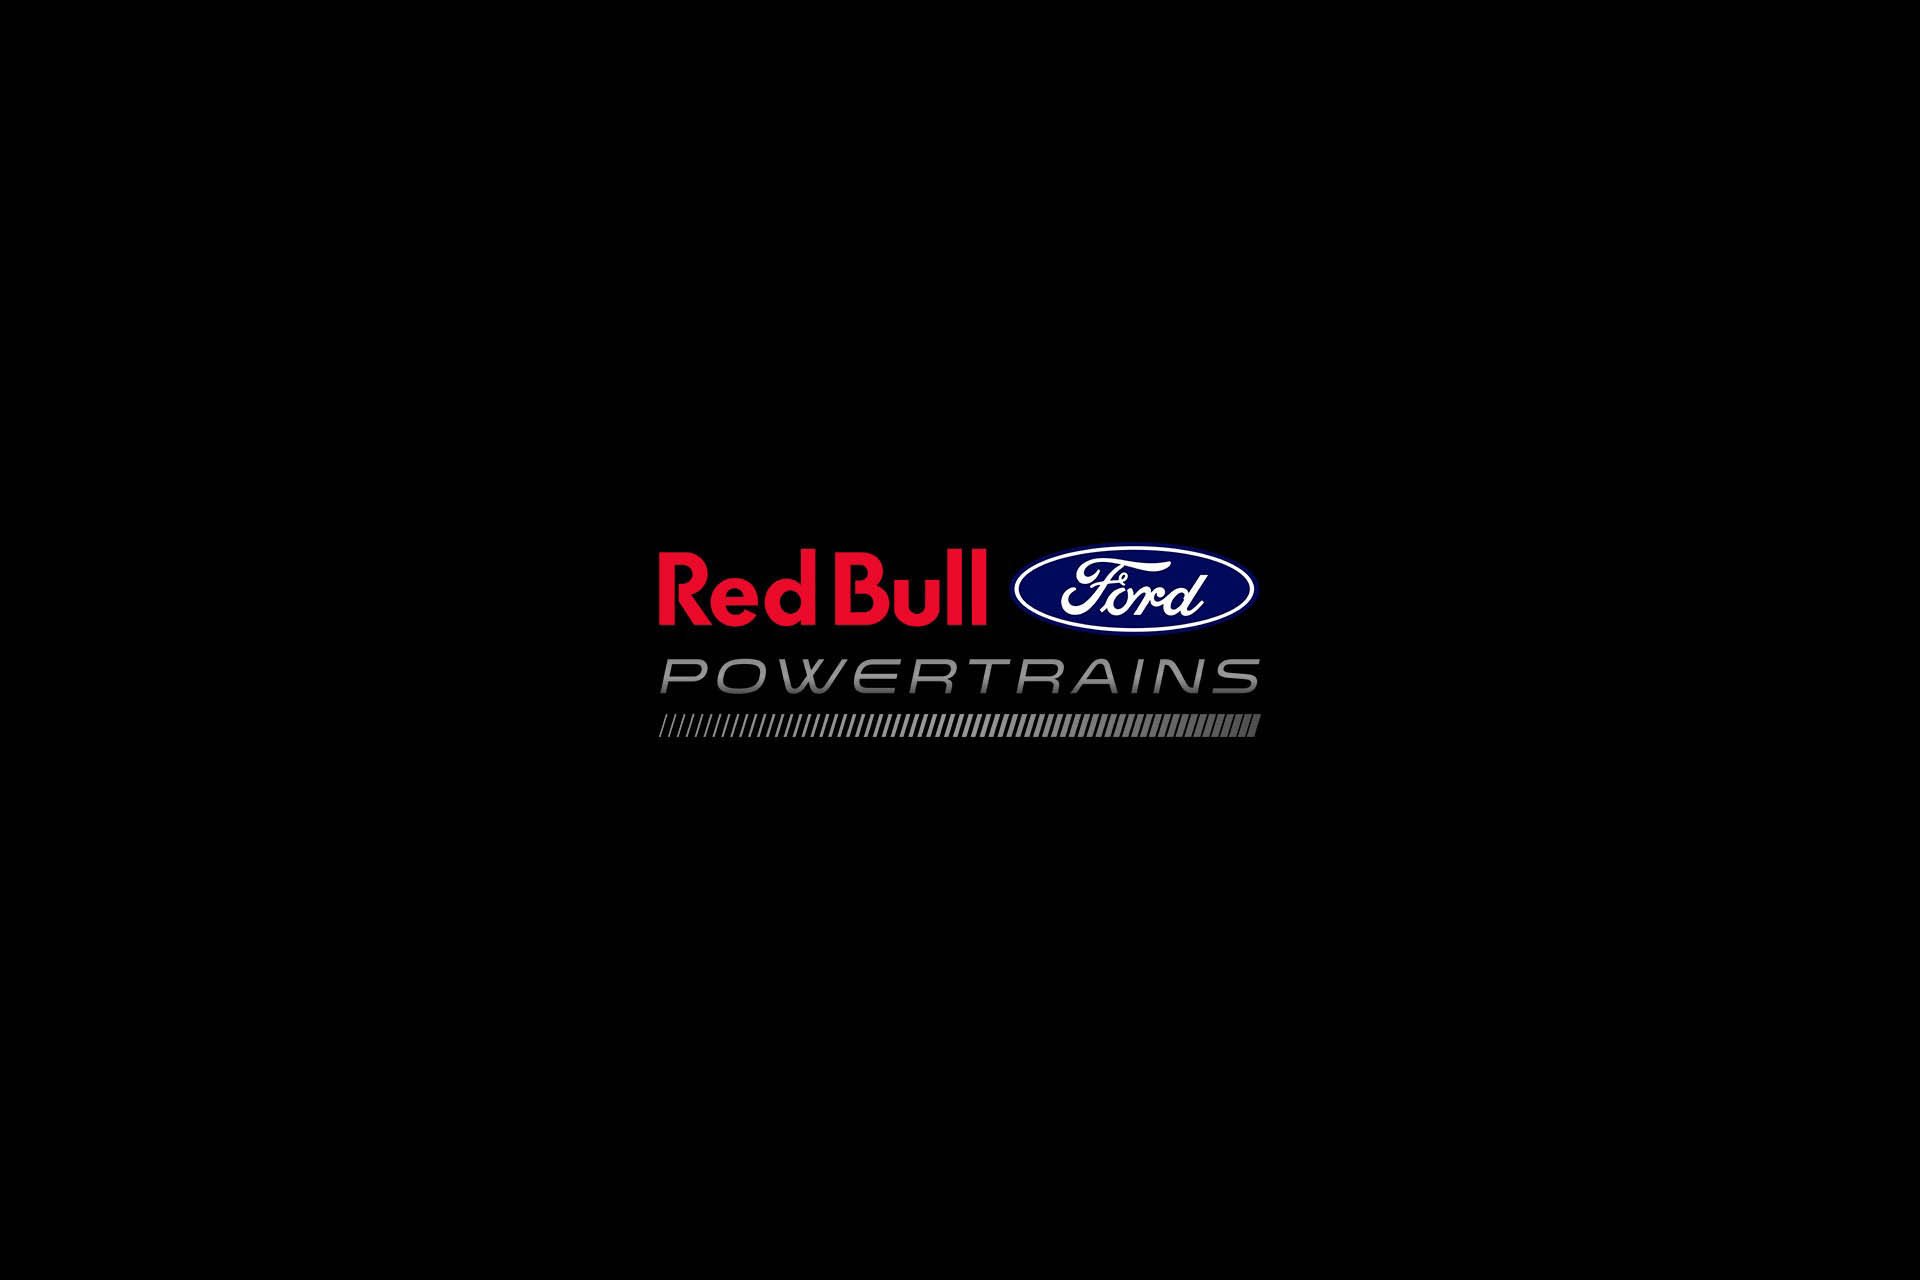 F1 - Red Bull Ford Powertrains